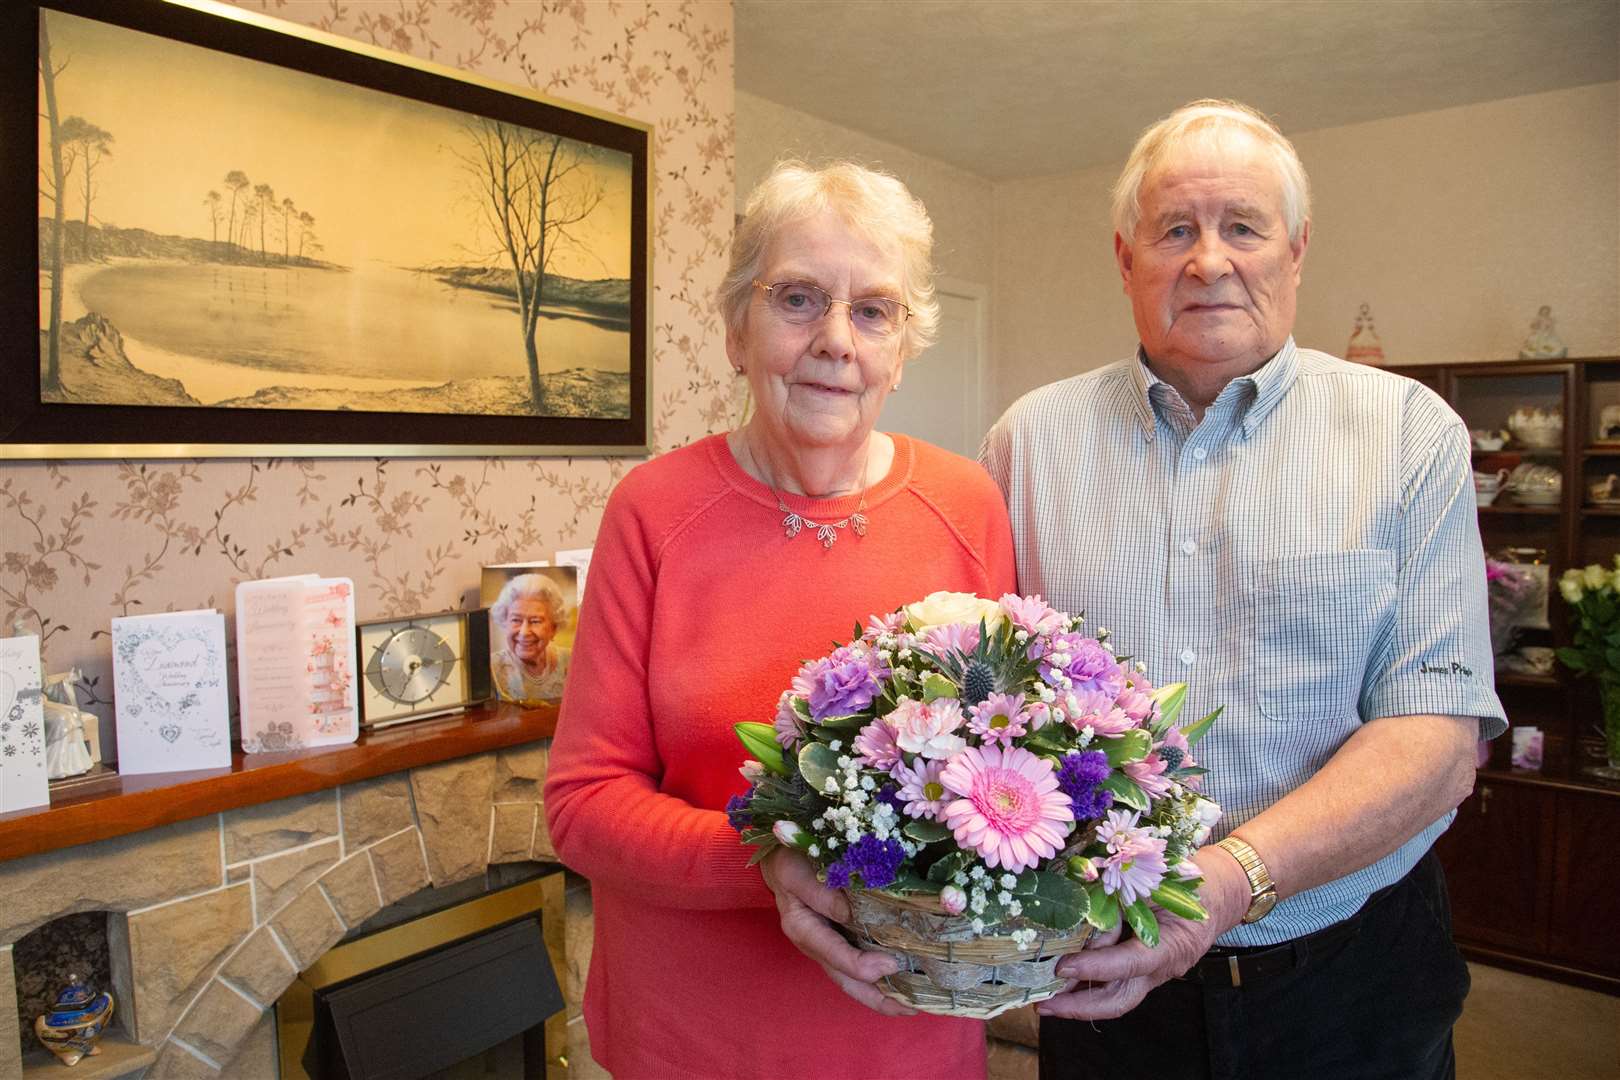 A Diamond day for Charlie and Edna Cameron as they celebrate their 60th wedding anniversary at their Largue home. Picture: Daniel Forsyth.